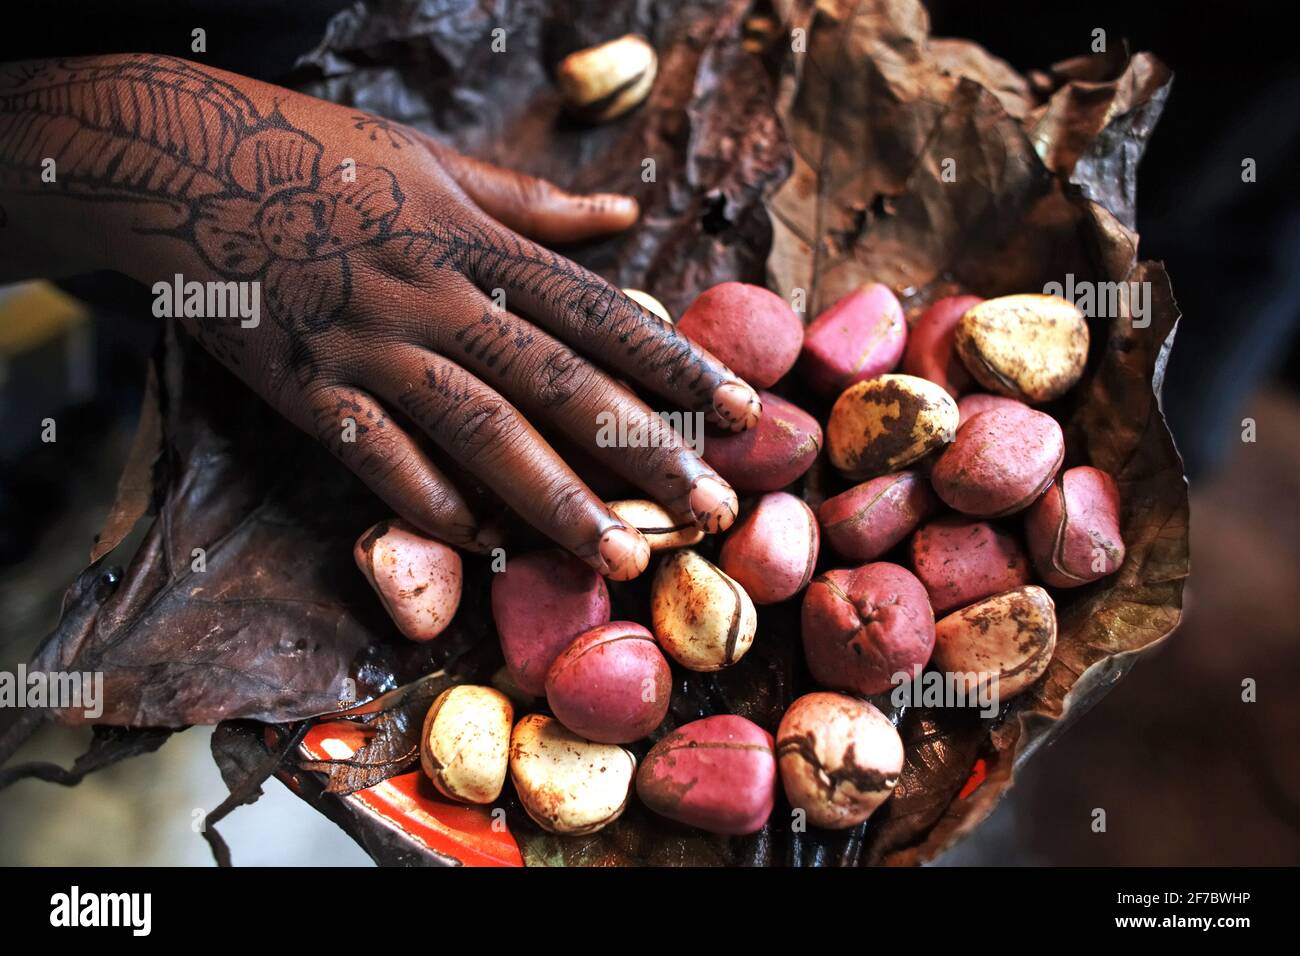 The Kola nut ( Cola acuminata )has a bitter flavour and caffeine contentand is chewed in many West African cultures. Stock Photo